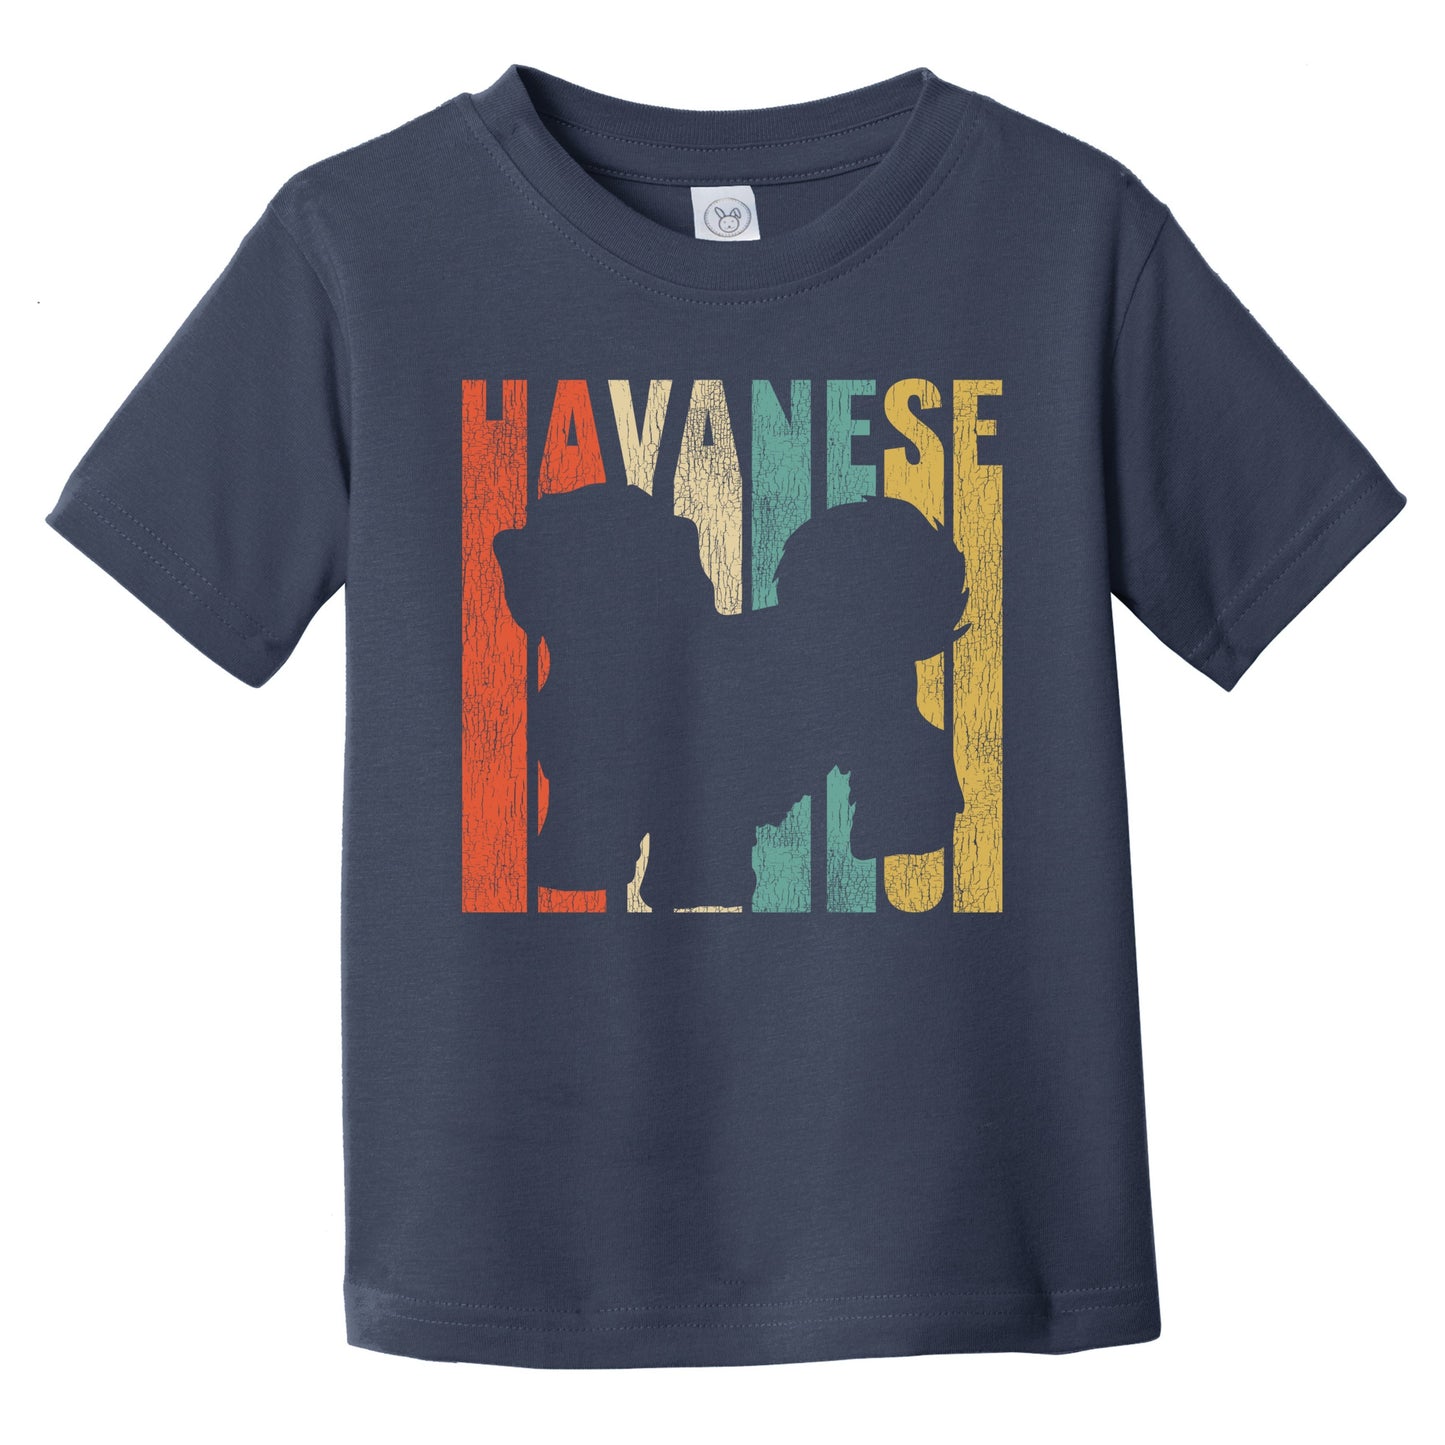 Retro Havanese Dog Silhouette Cracked Distressed Infant Toddler T-Shirt